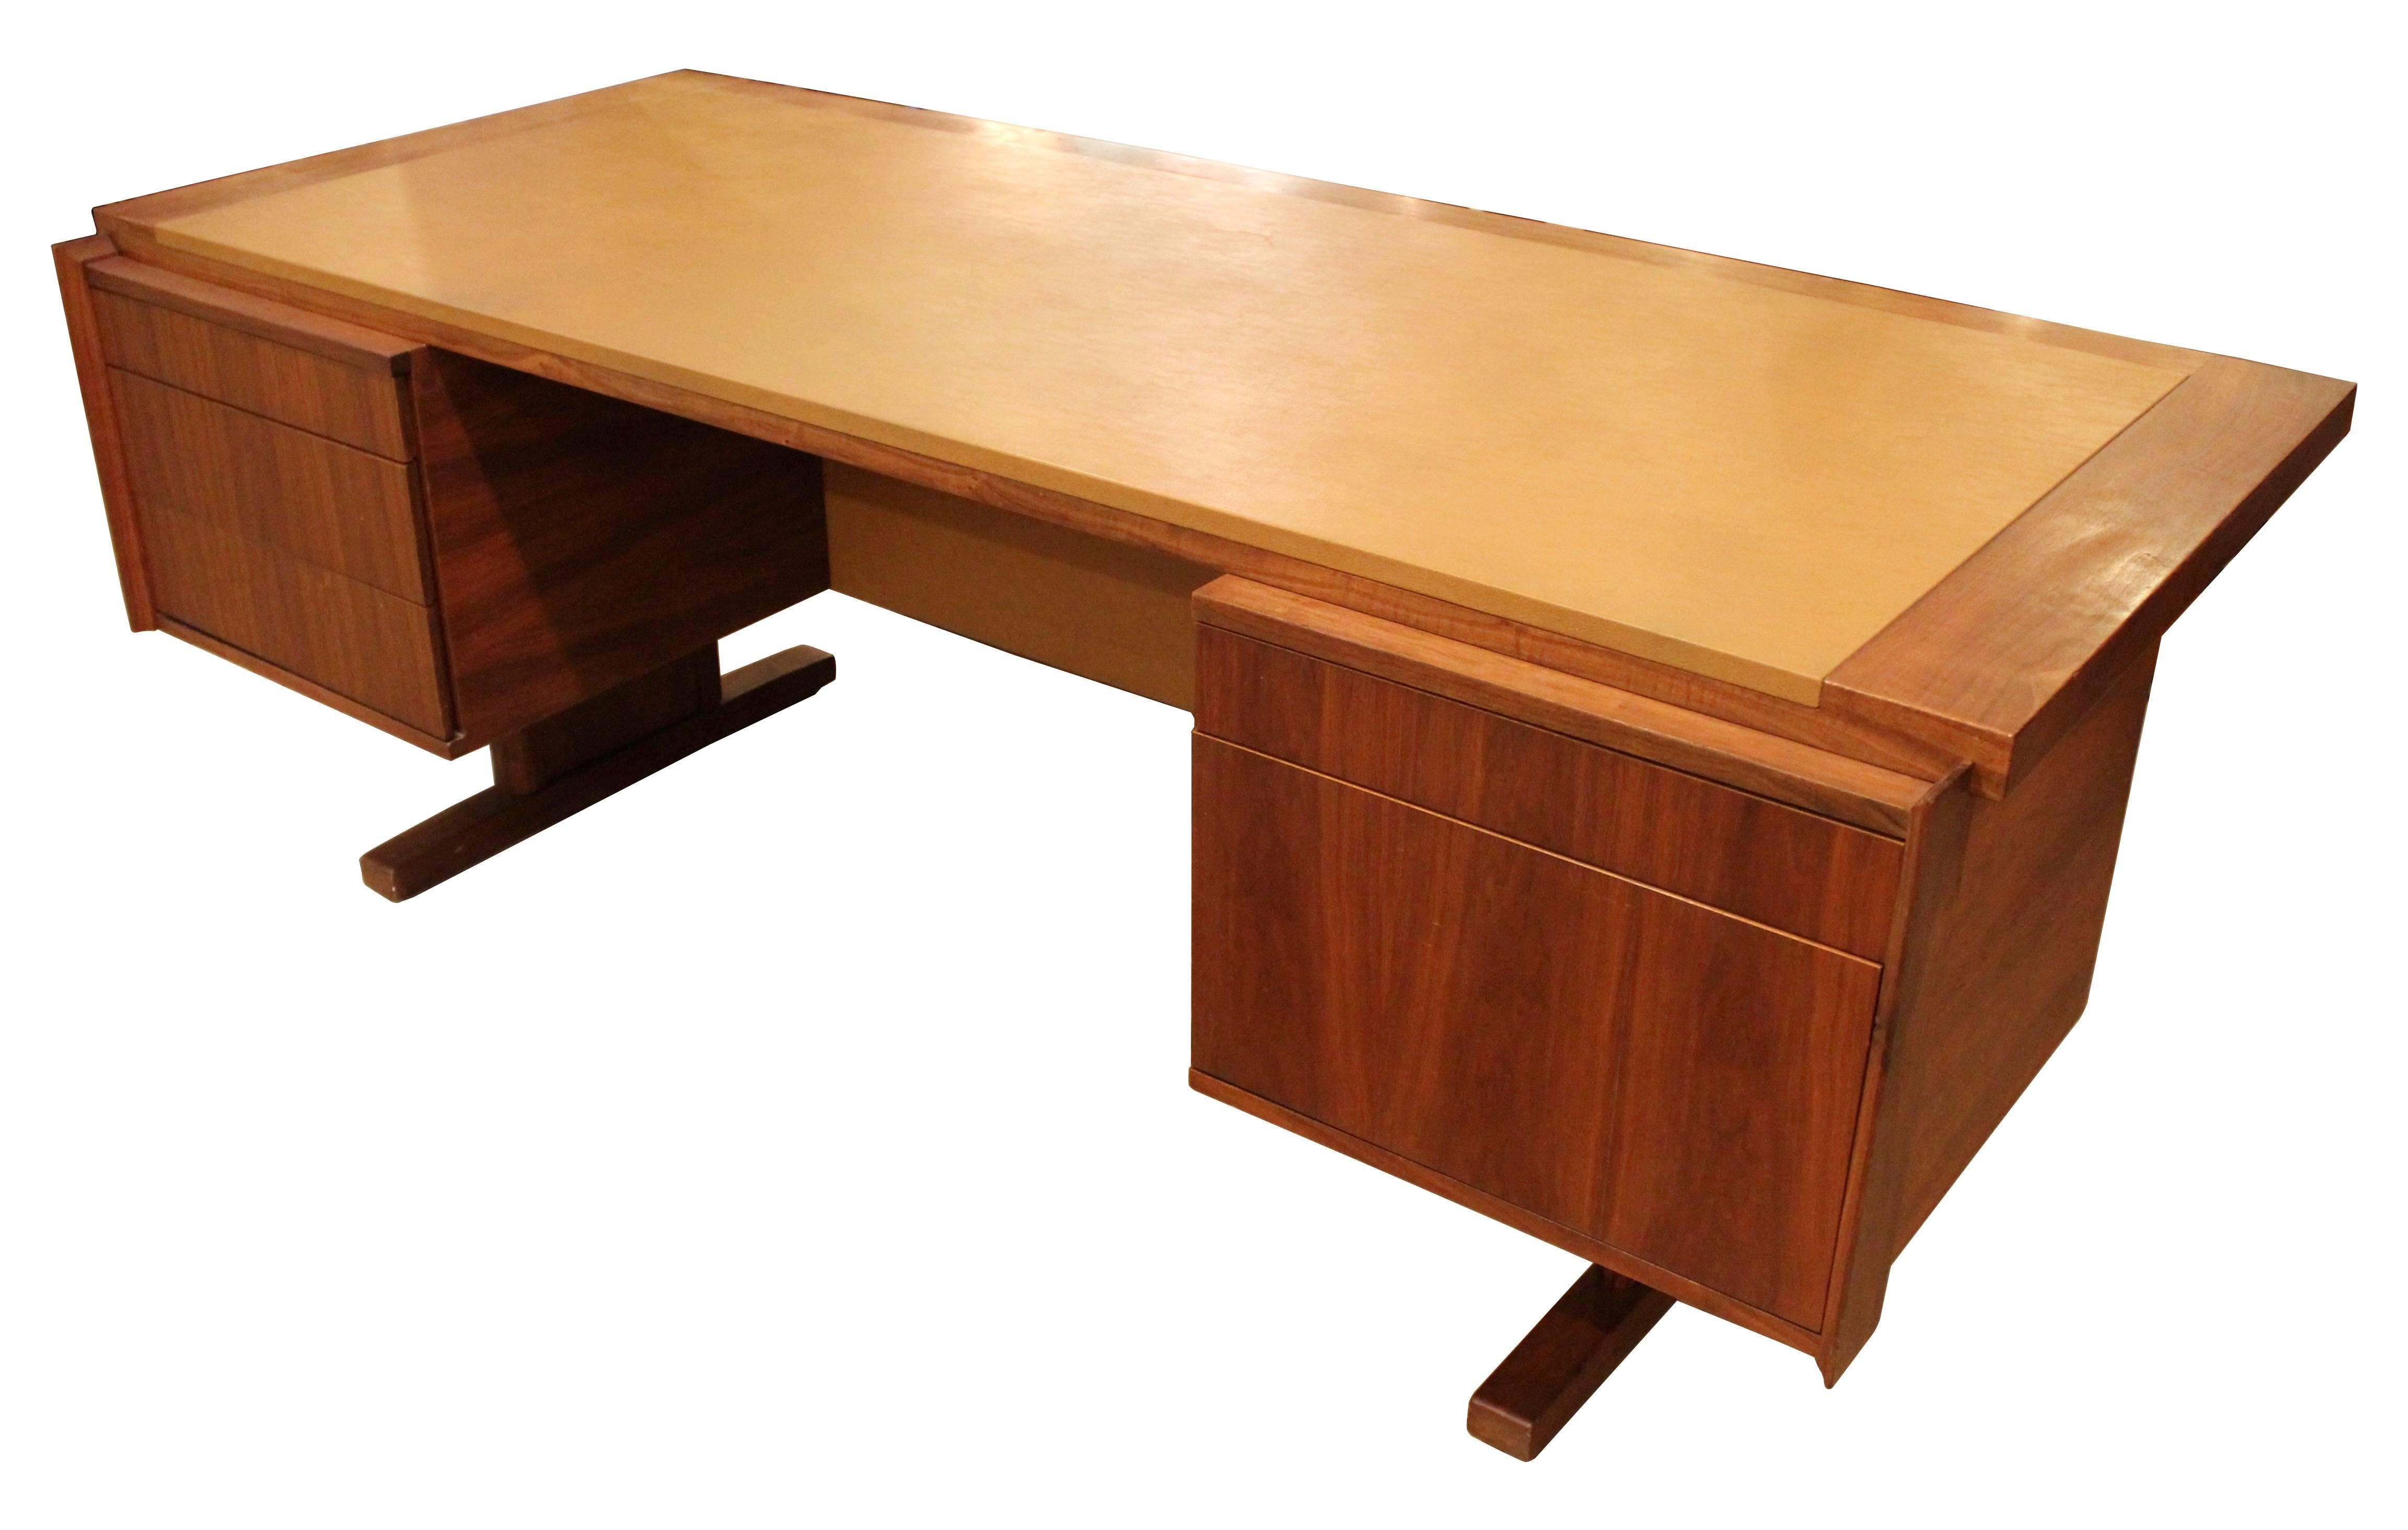 1960s walnut executive desk by Martin Borenstein, made in California. The desk has four drawers, one with built-in carved walnut organizer, a file cabinet drawer, and a large leatherette inset desktop. There is slight veneer loss behind one of the